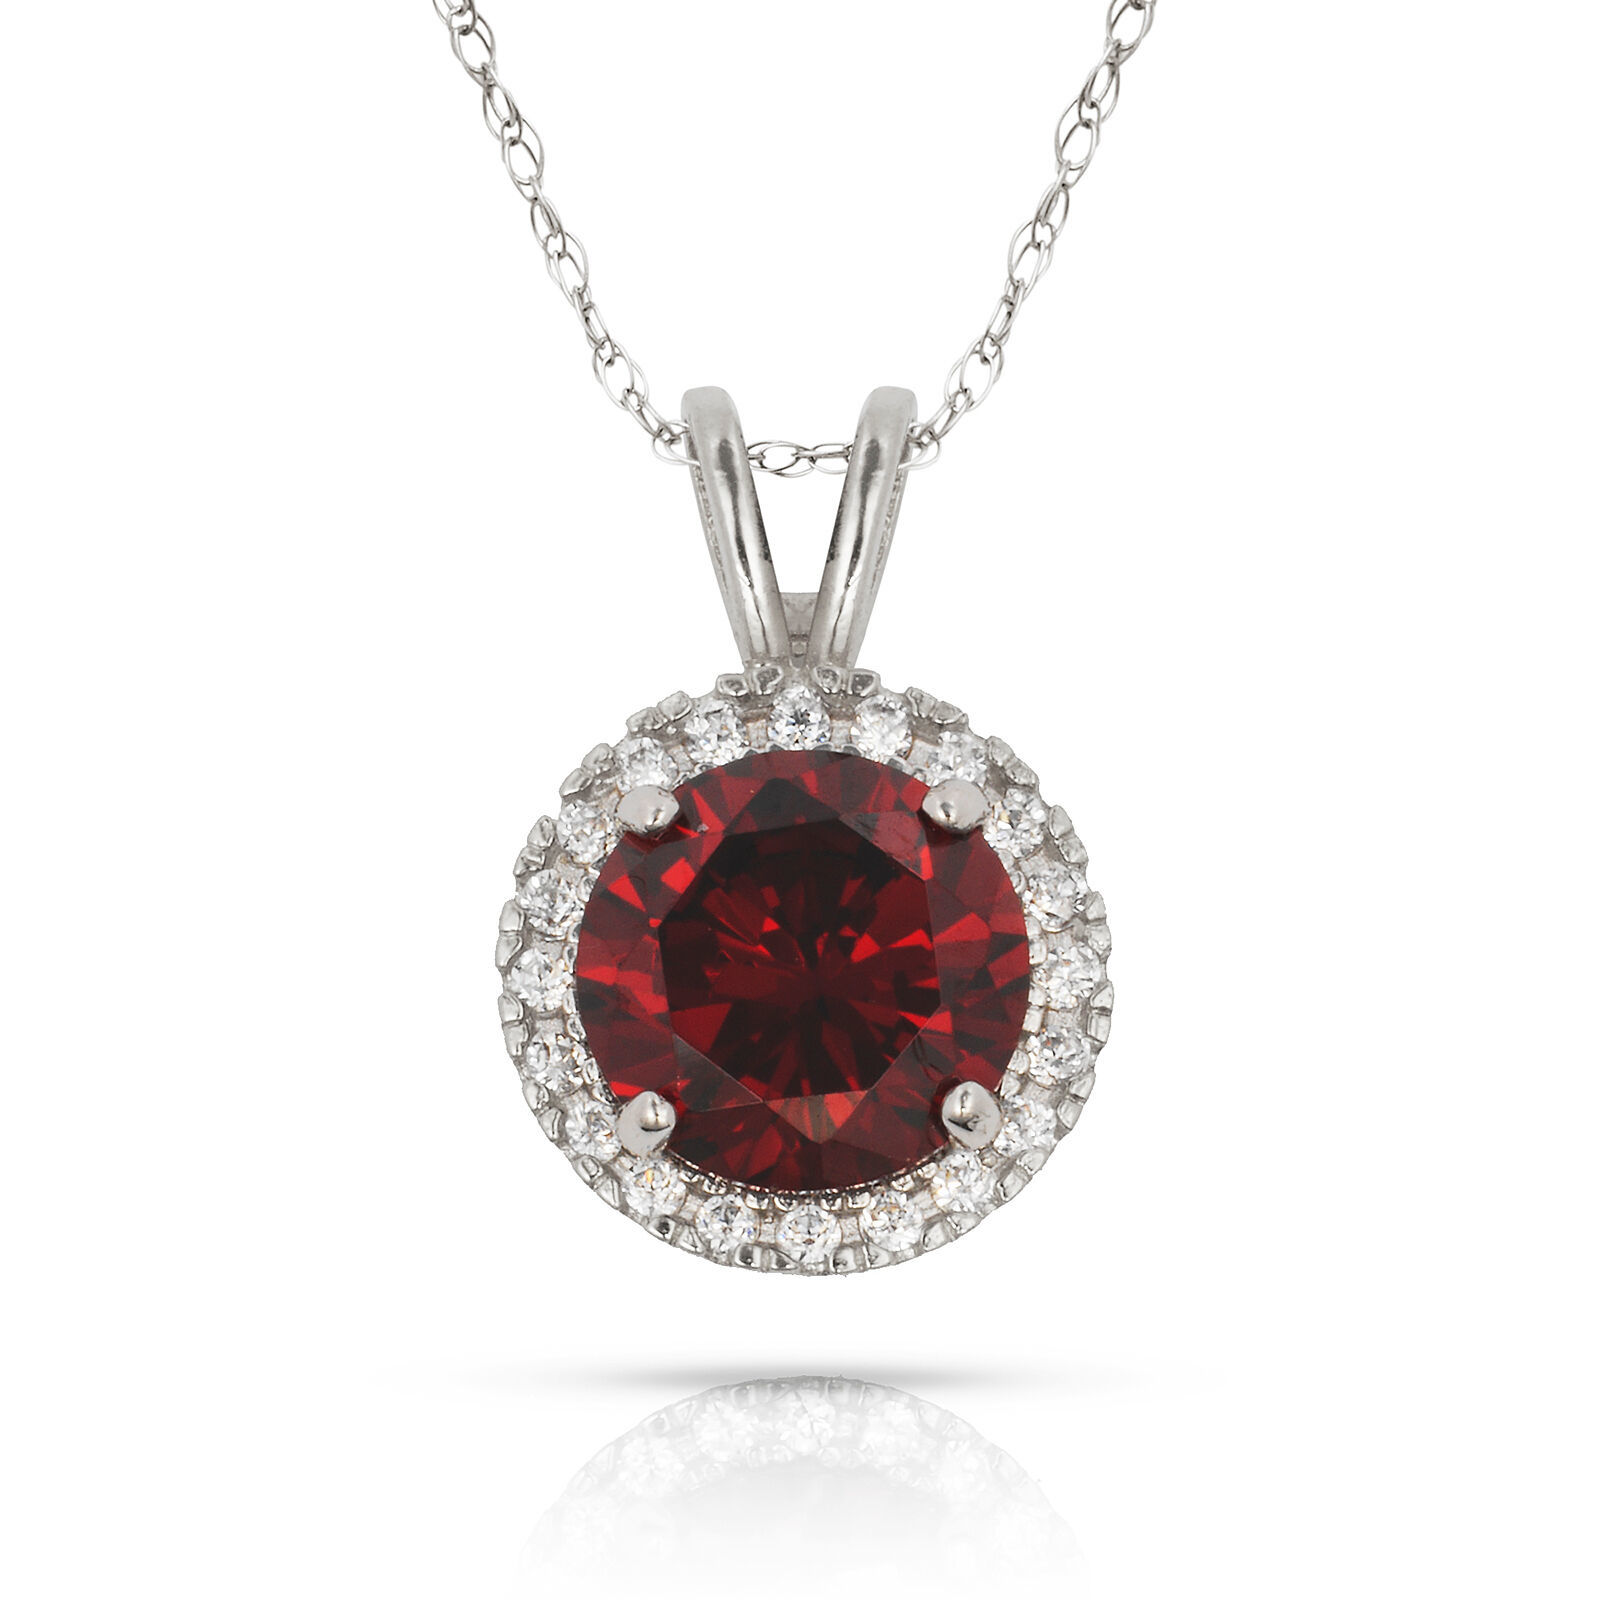 Primary image for 1.50CT 14K White Gold Halo Garnet Round Shape Basket Setting Pendant w/ Chain